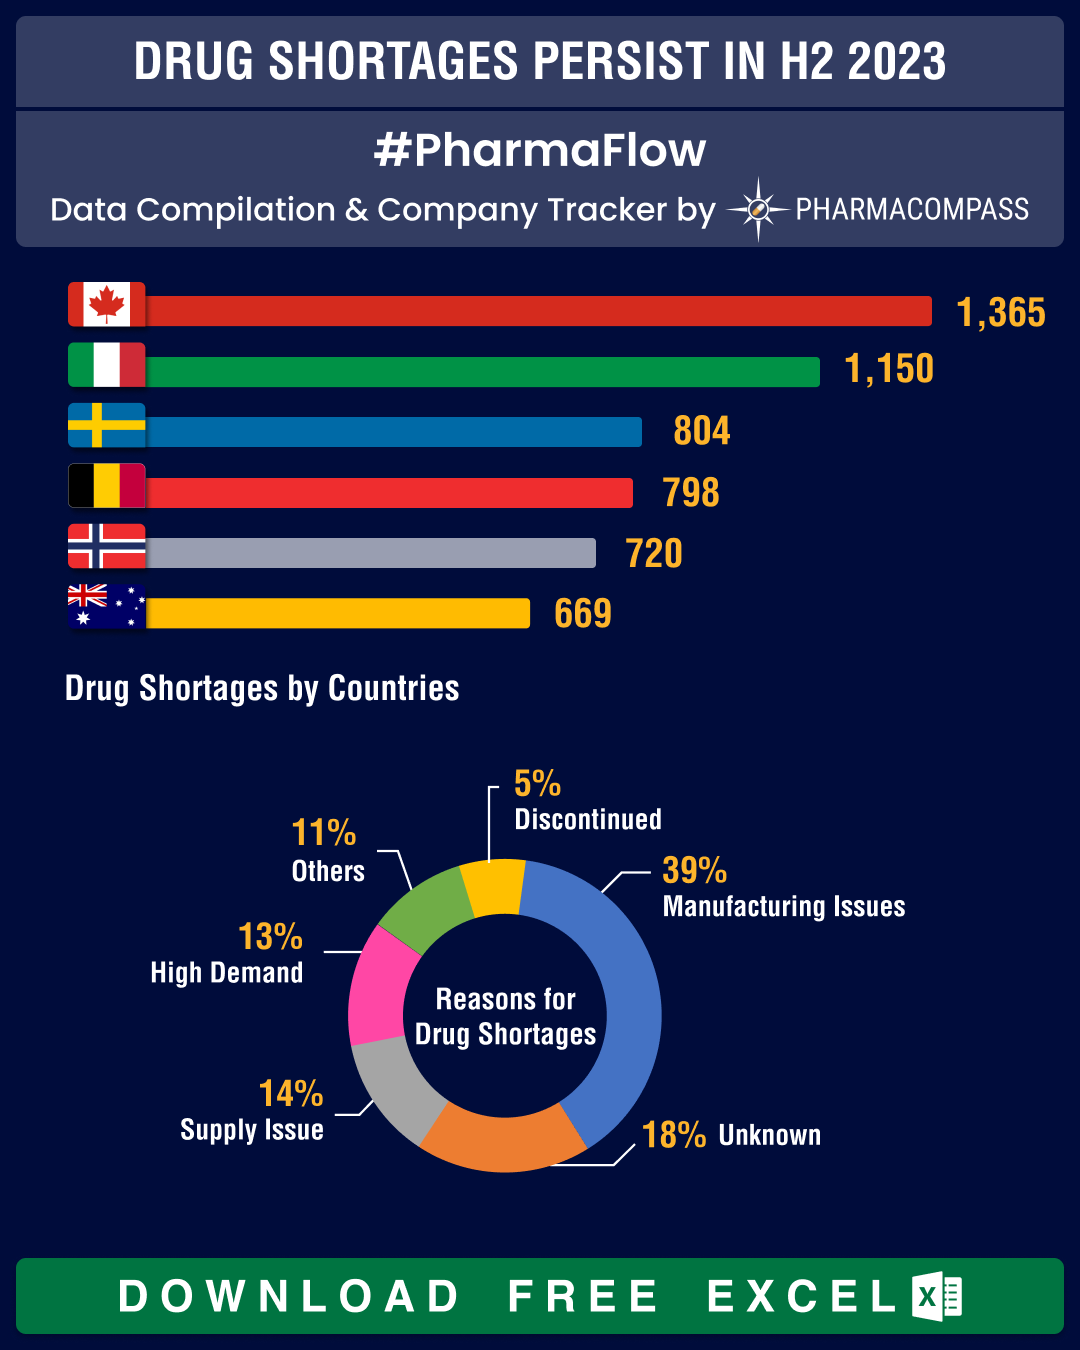 Drug shortages persist in H2 2023: Which countries are most affected?